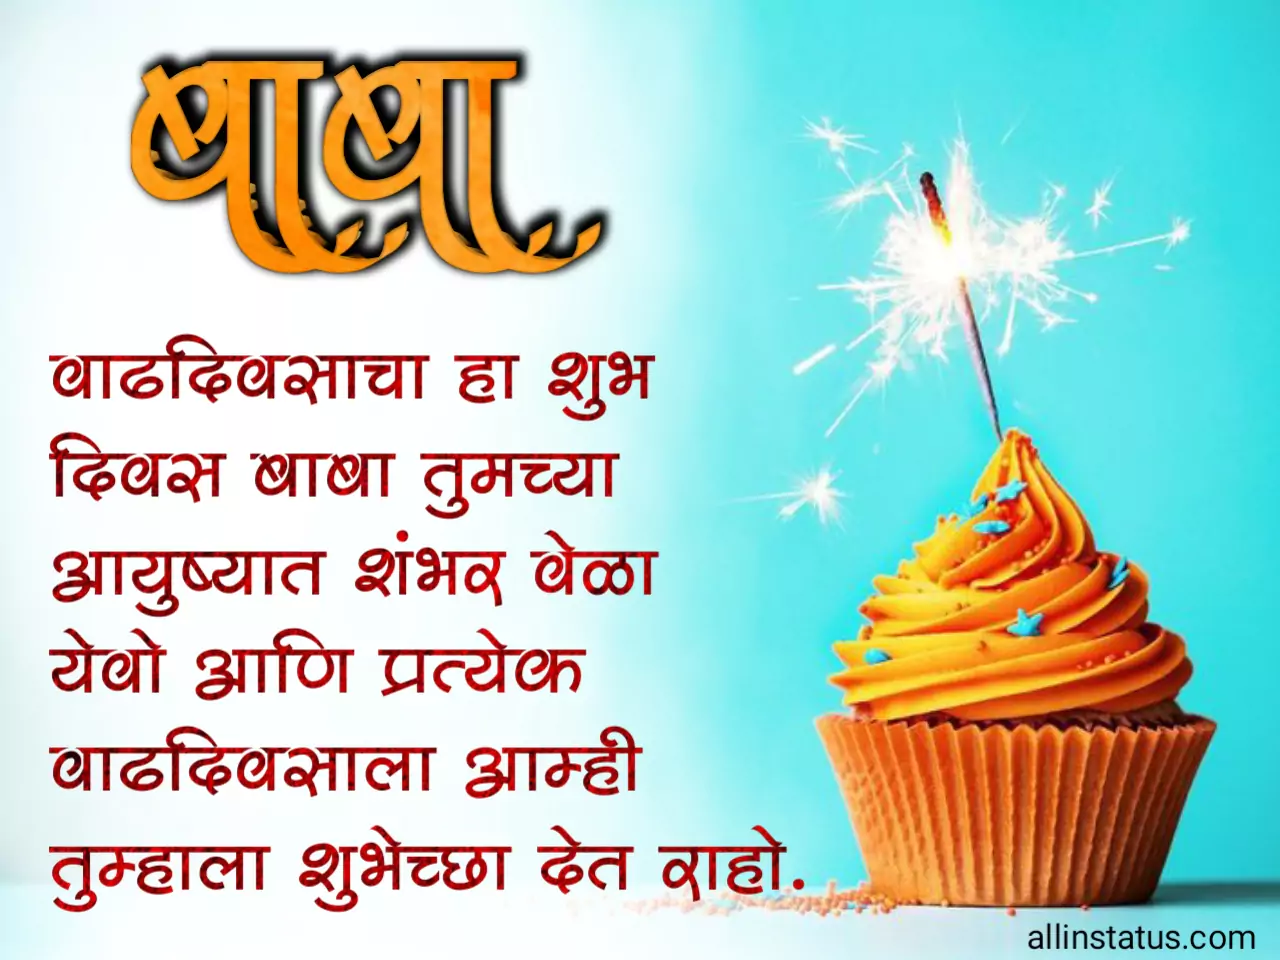 Happy birthday wishes for father in marathi